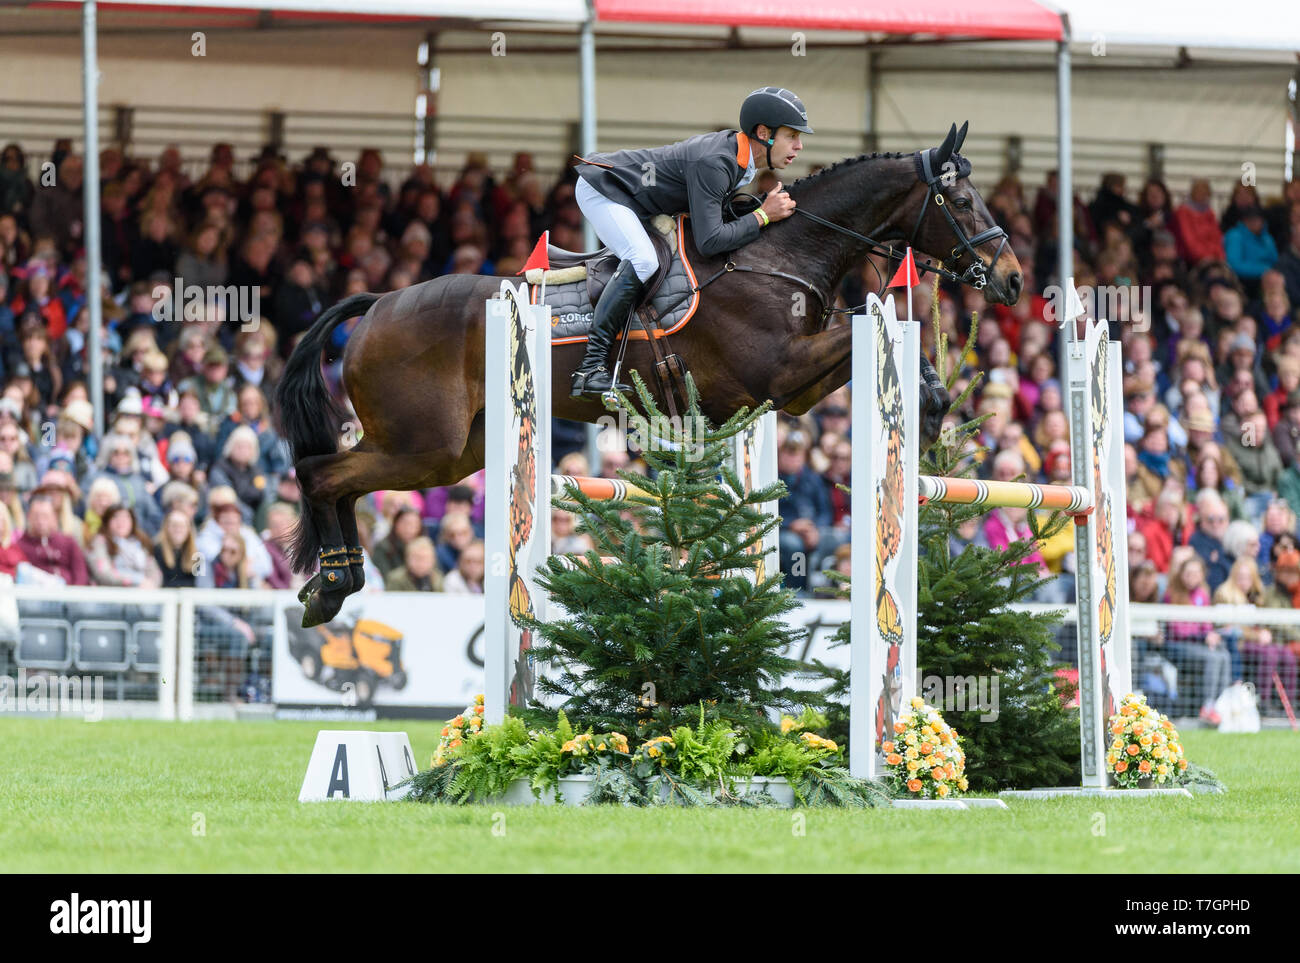 Christopher Burton and COOLEY LANDS during the showjumping phase, Mitsubishi Motors Badminton Horse Trials, Gloucestershire, 2019 Stock Photo